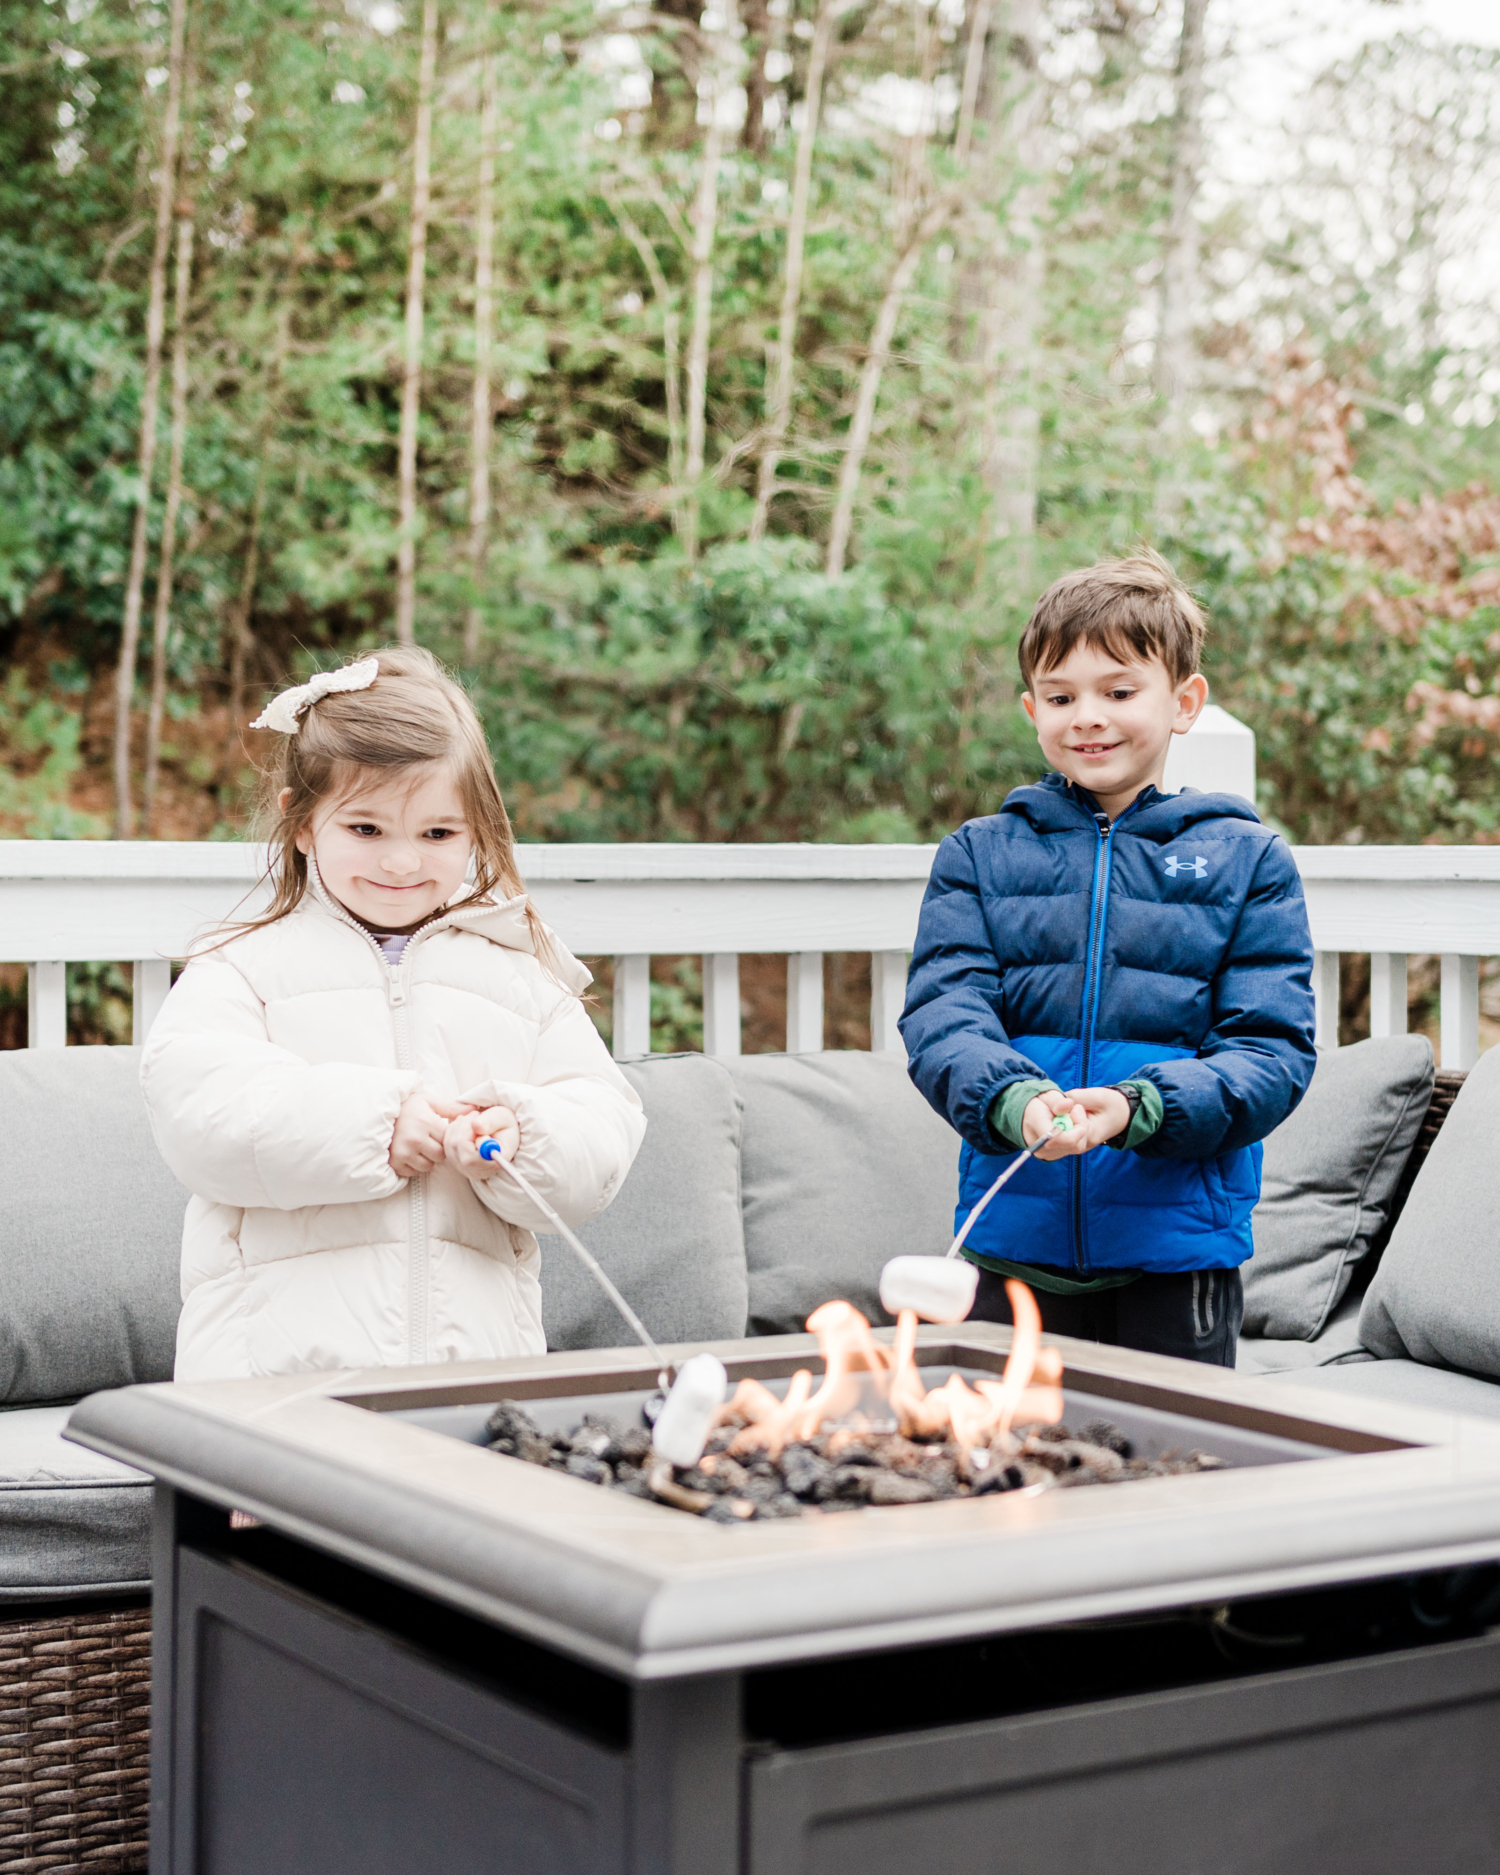 Two kids roasting marshmallows over a fire to make smores. An activity during your weekend in Helen, Georgia.